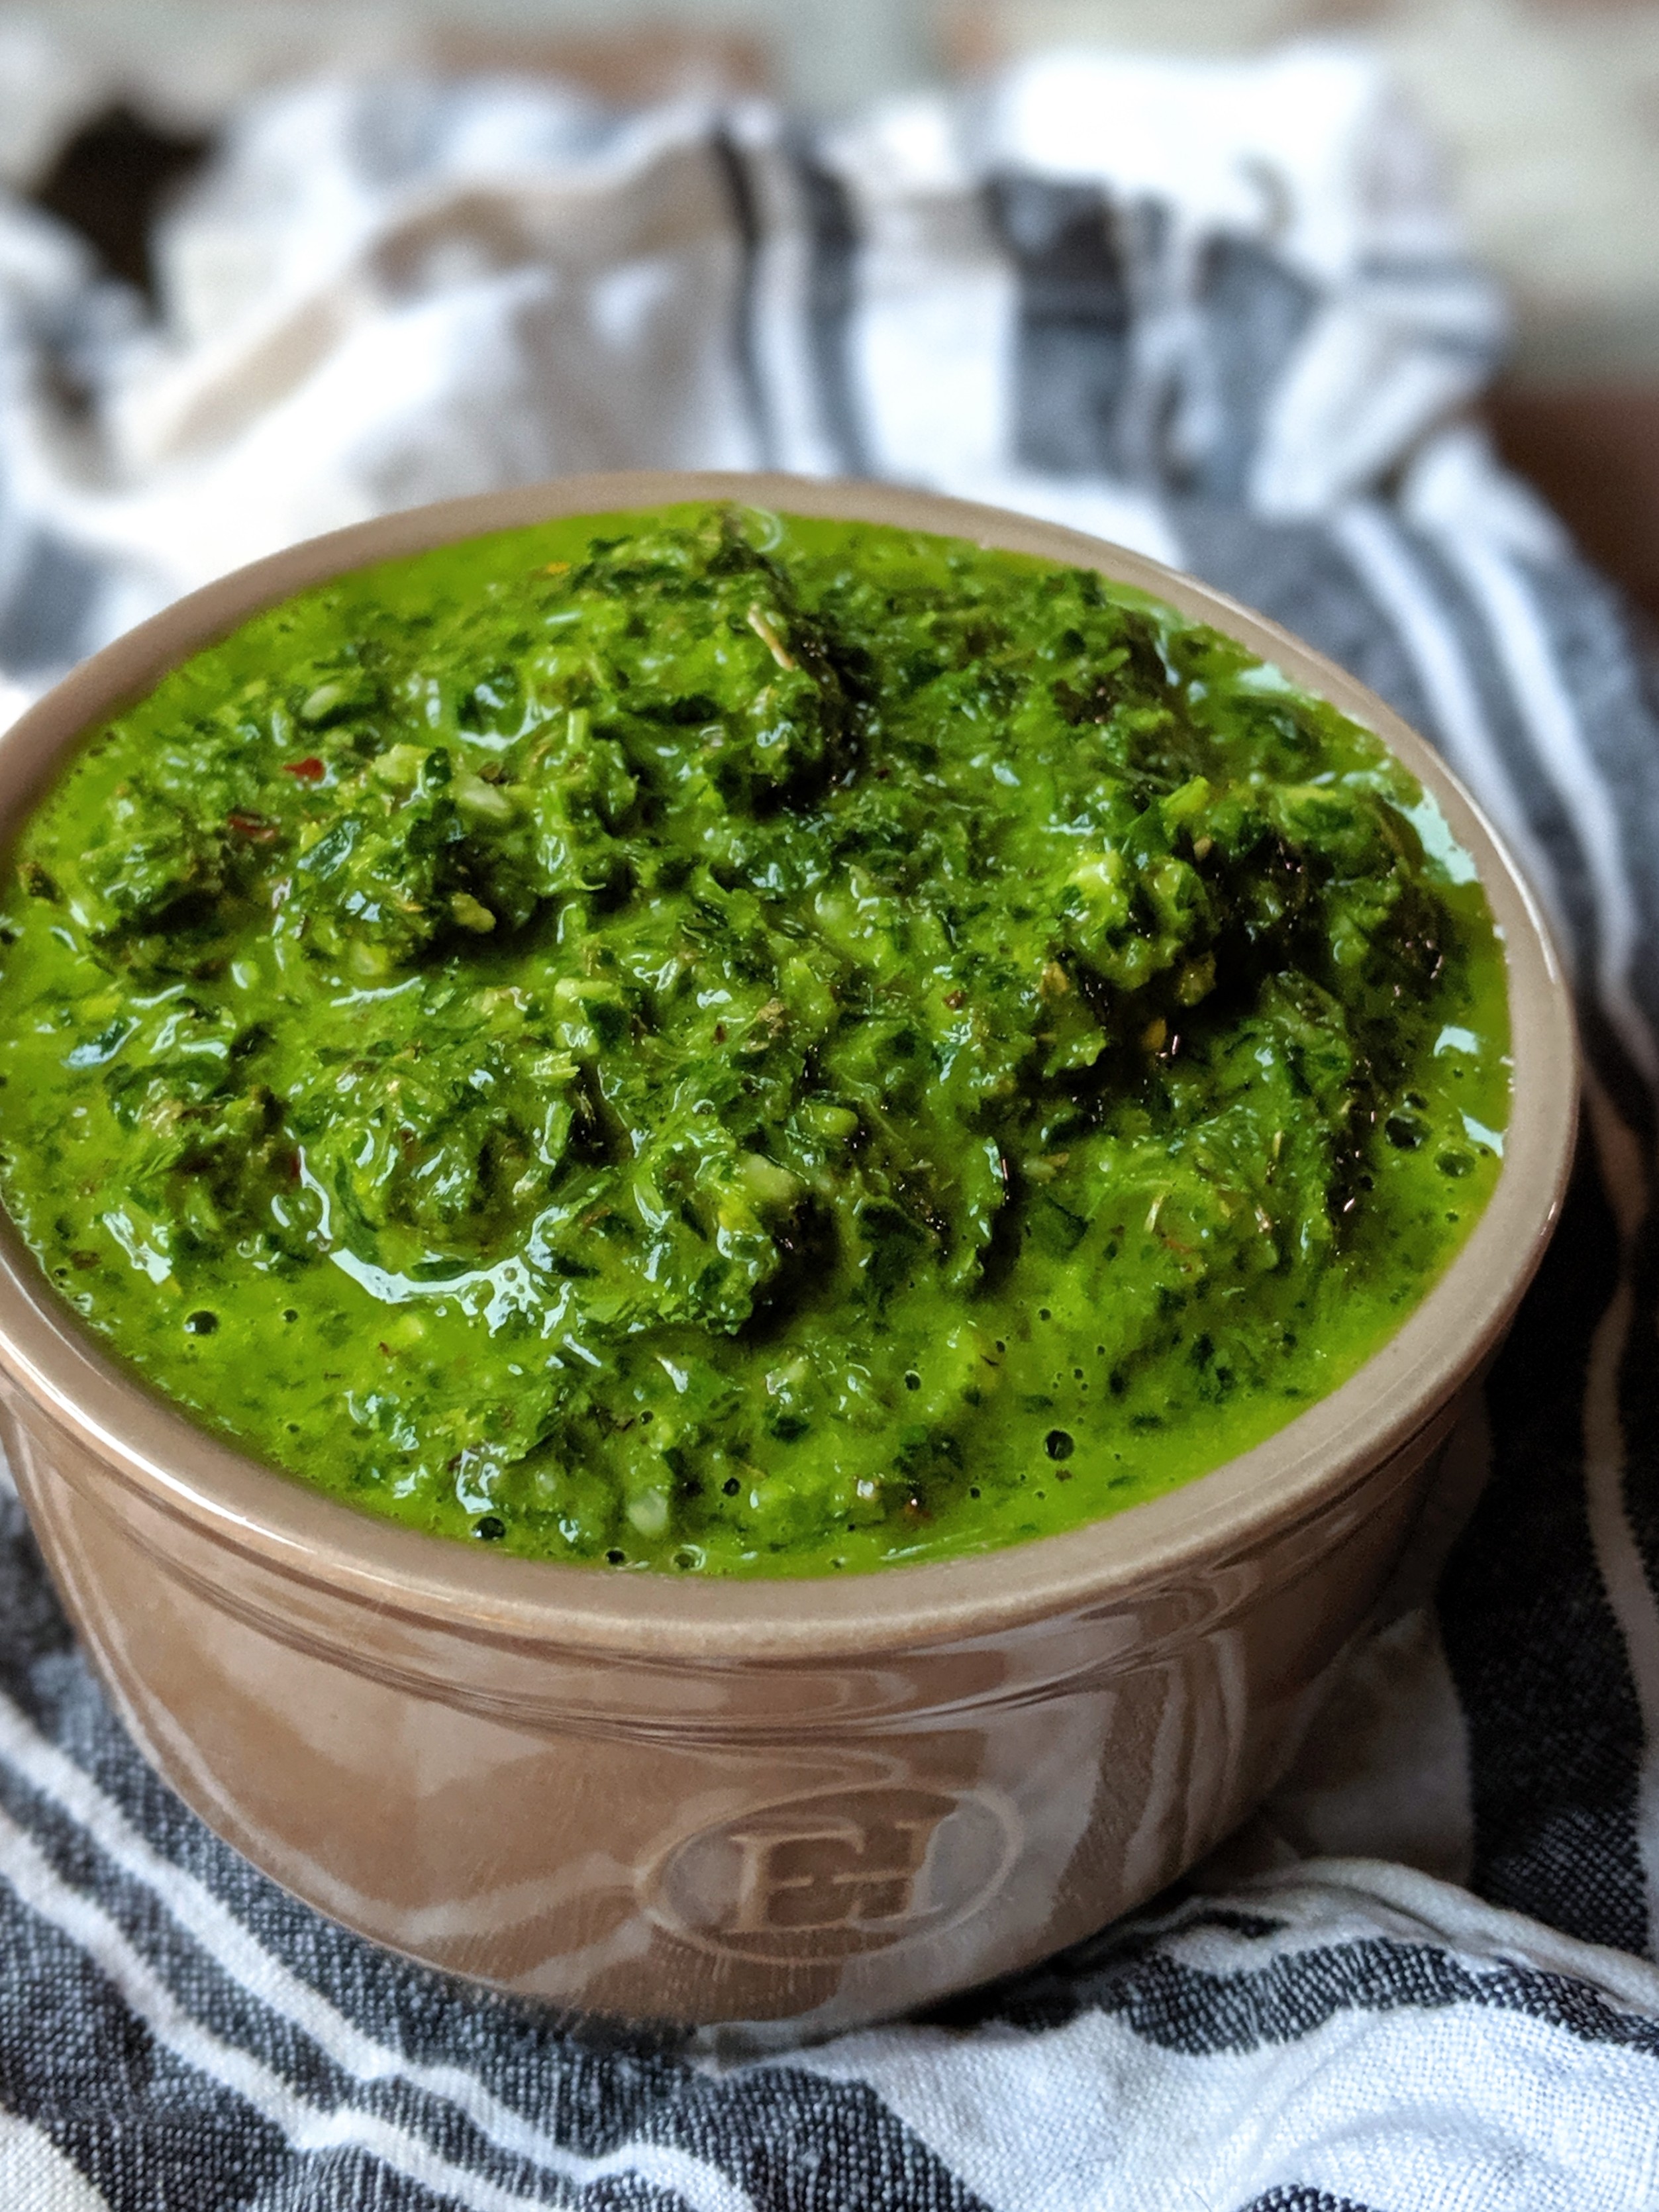 cilantro chimichurri sauce in the blender recipe healthy sauces with cilantro parsley olive oil and red wine vinegar